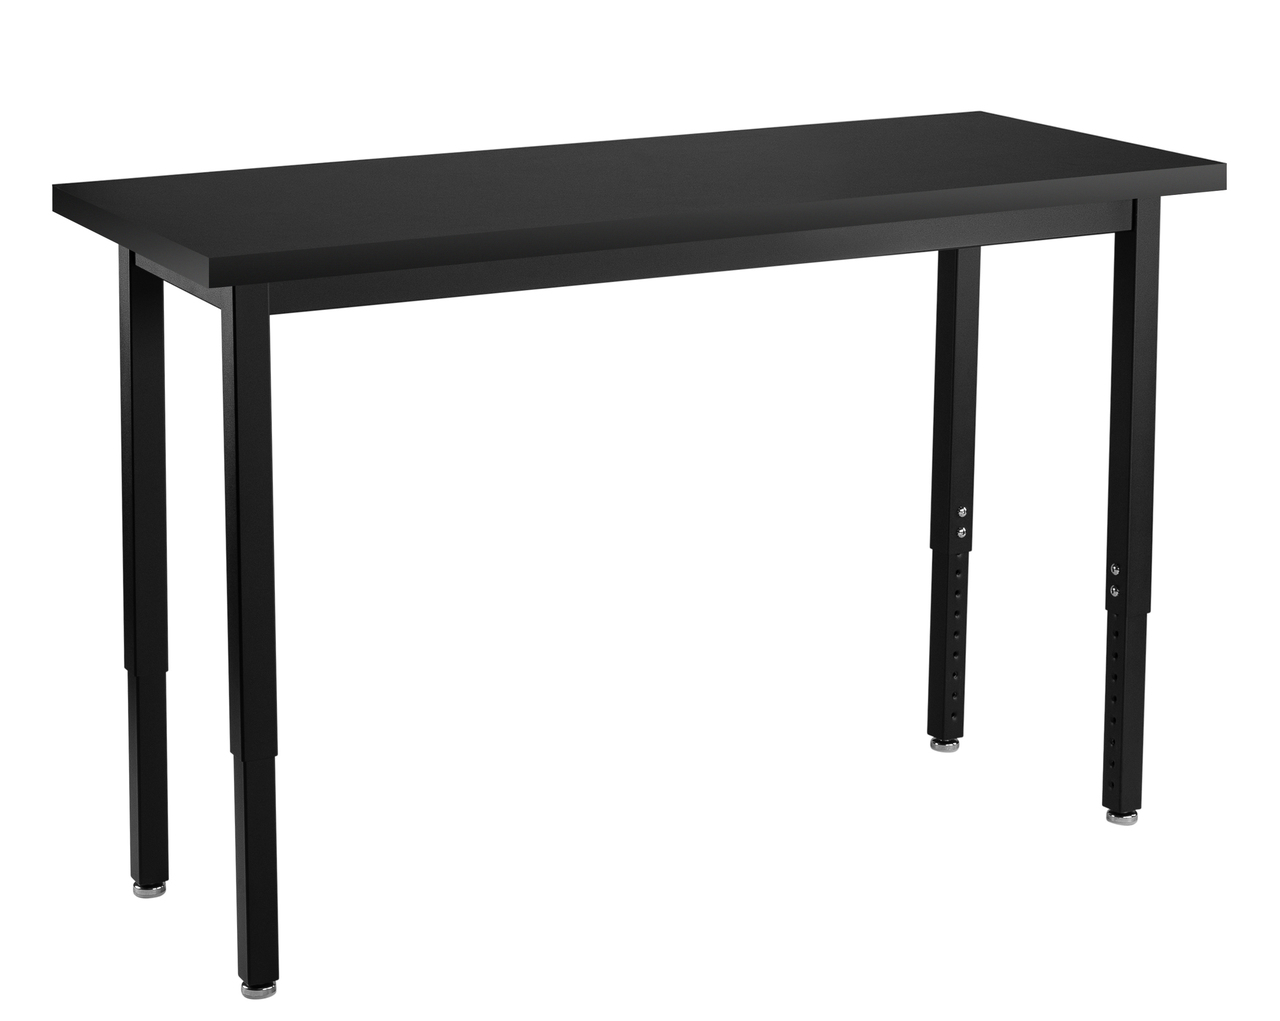 NPS Steel Science Lab Table -  18" x 60" -  Phenolic Top - Black Surface Color